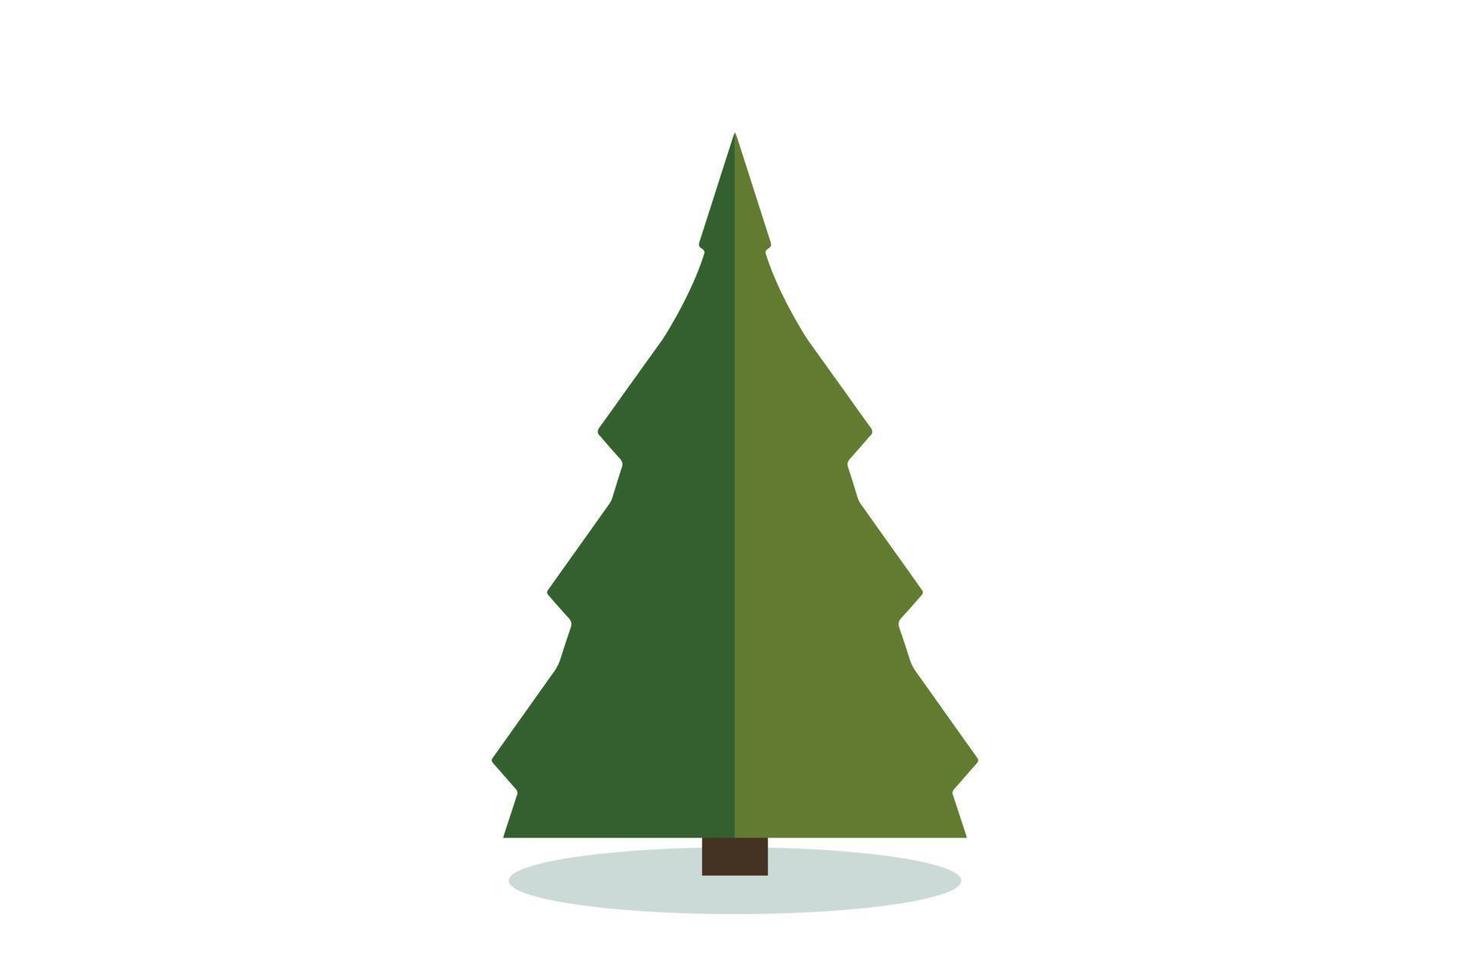 Christmas tree vector icon. Modern style fir symbol in color for holiday decoration, gift card design.